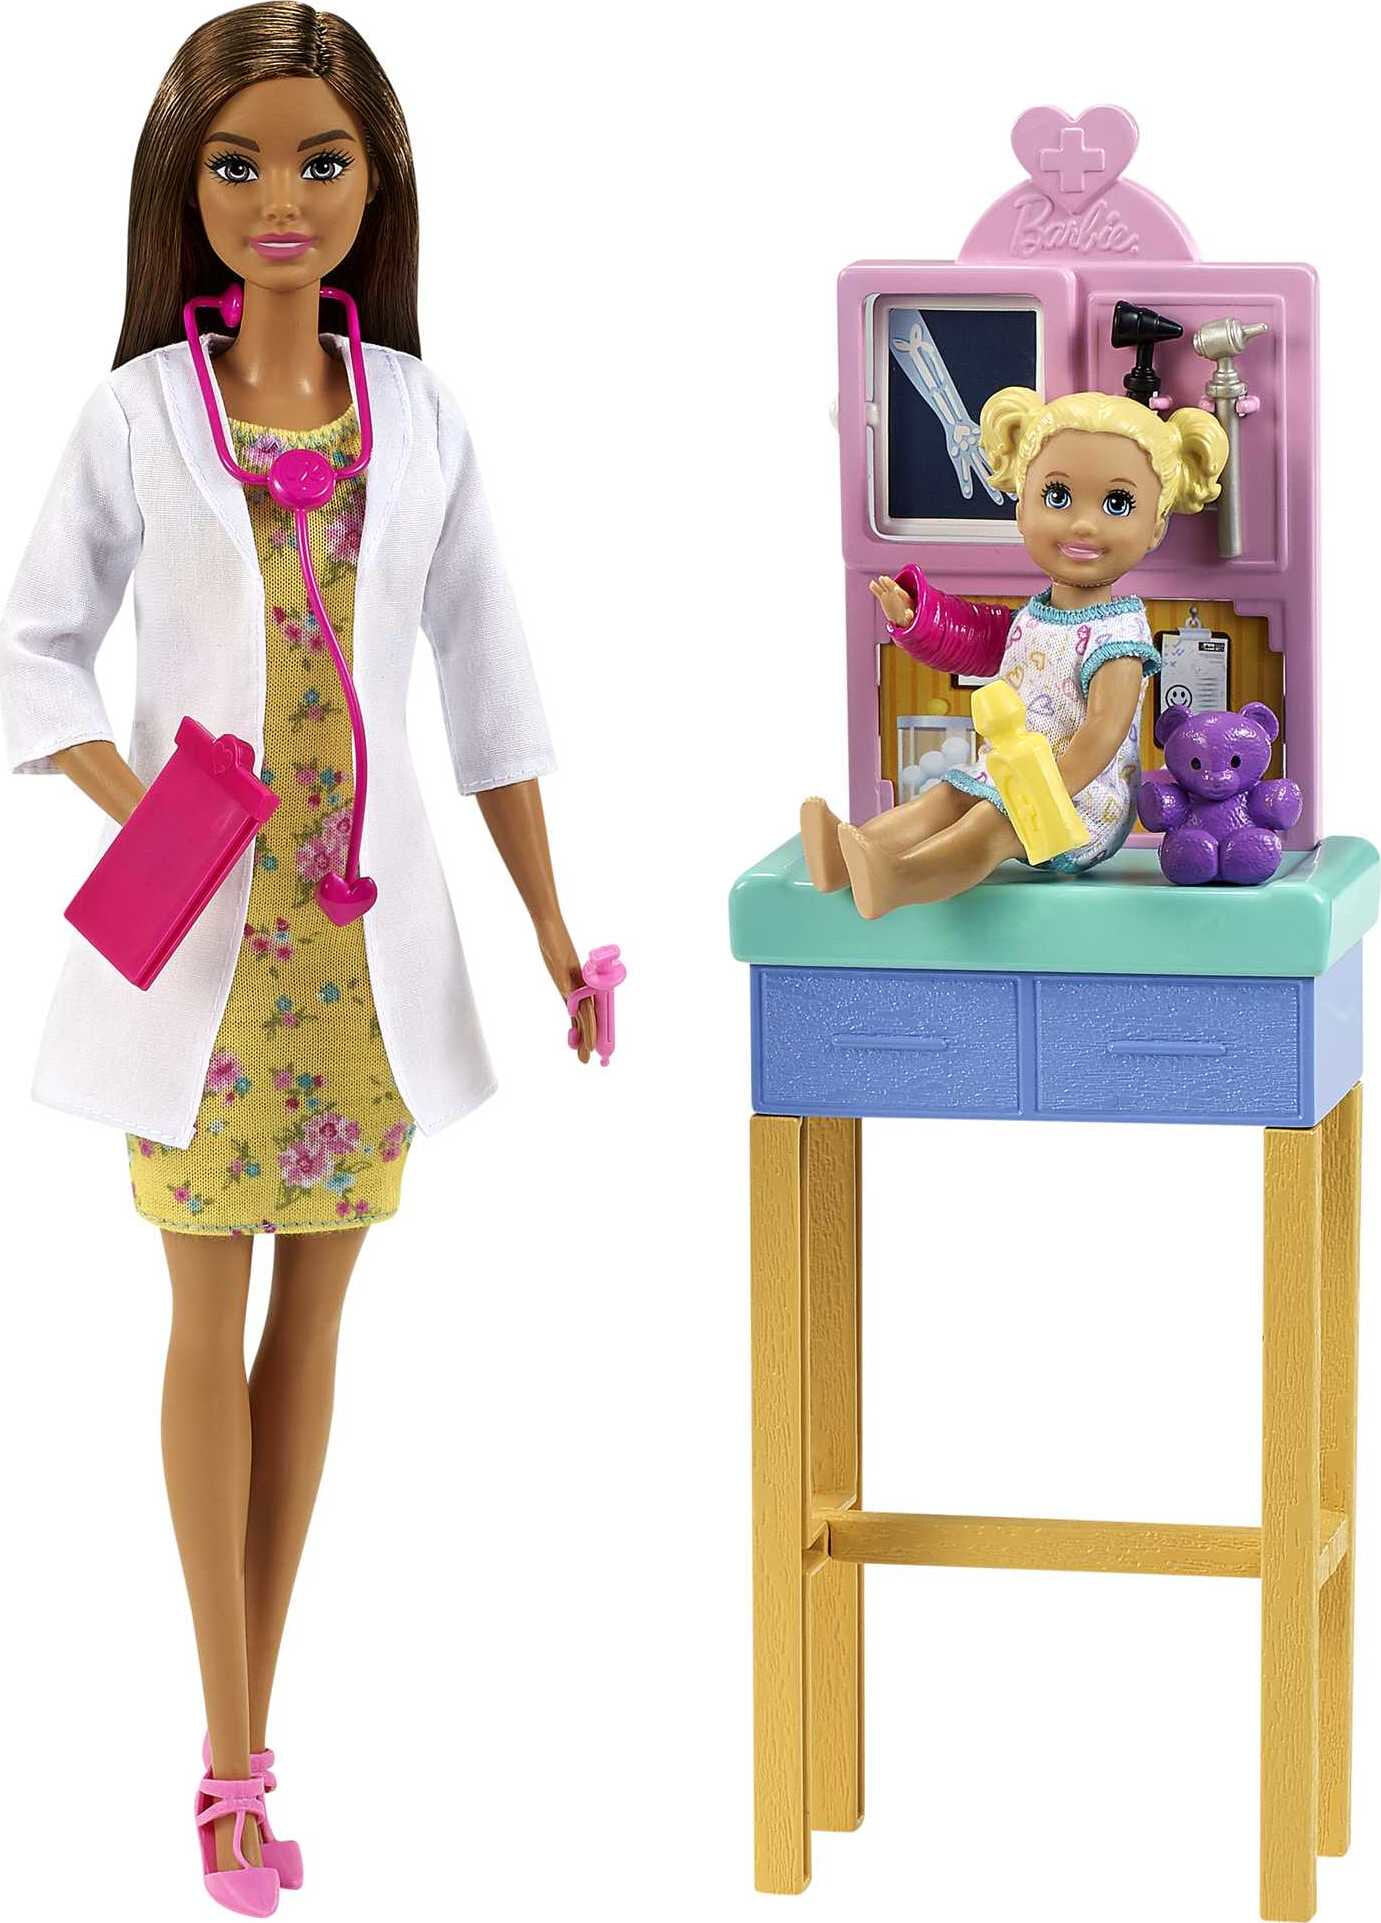 Barbie BBQ Grill Furniture and Accessory Set Kid Toy Gift 